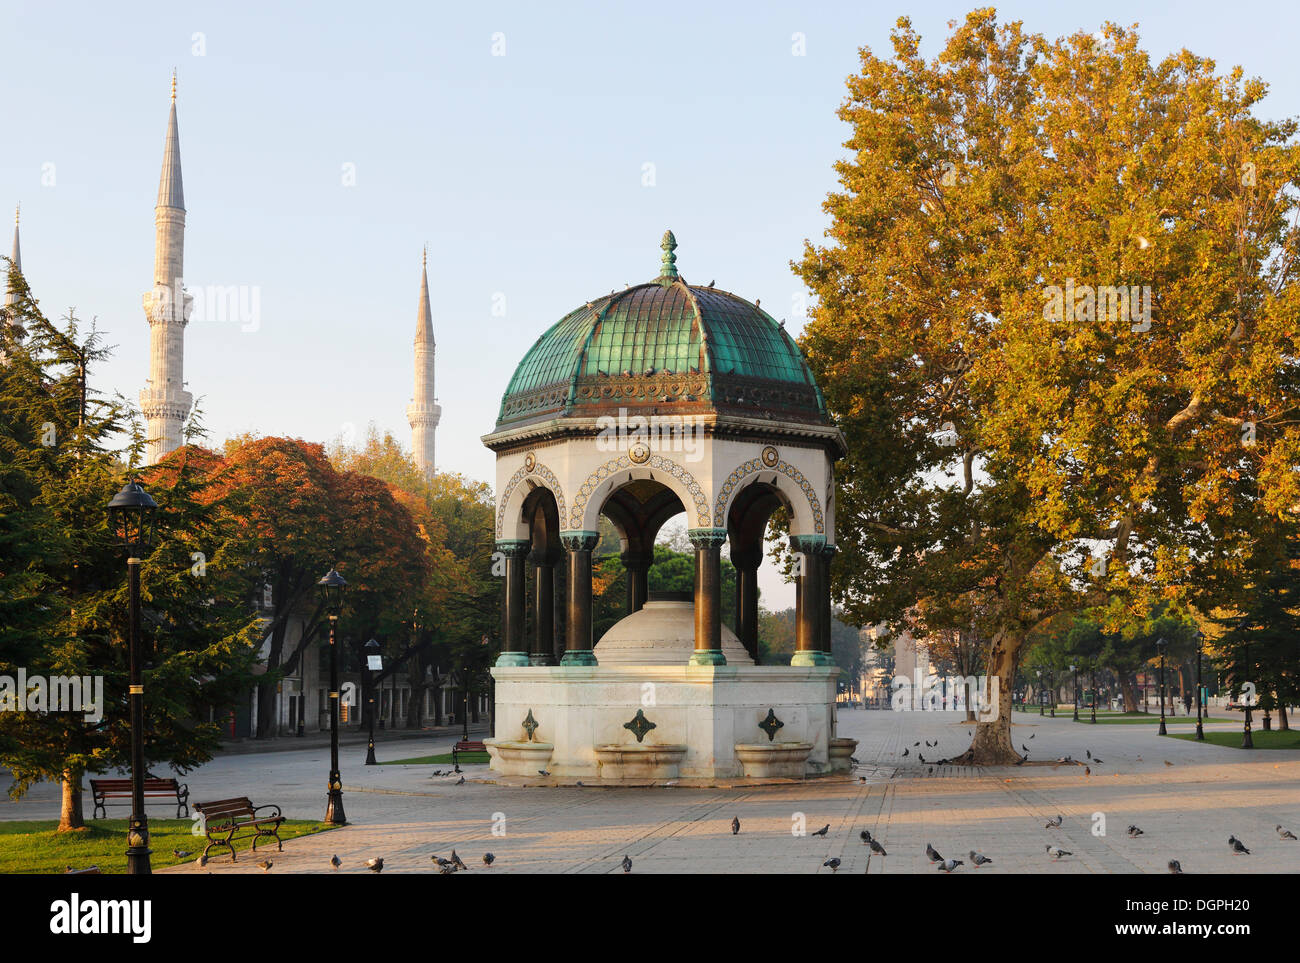 German Fountain in the Hippodrome or At Meydani square, the Minarets of Sultan Ahmed Mosque, Istanbul, European side Stock Photo